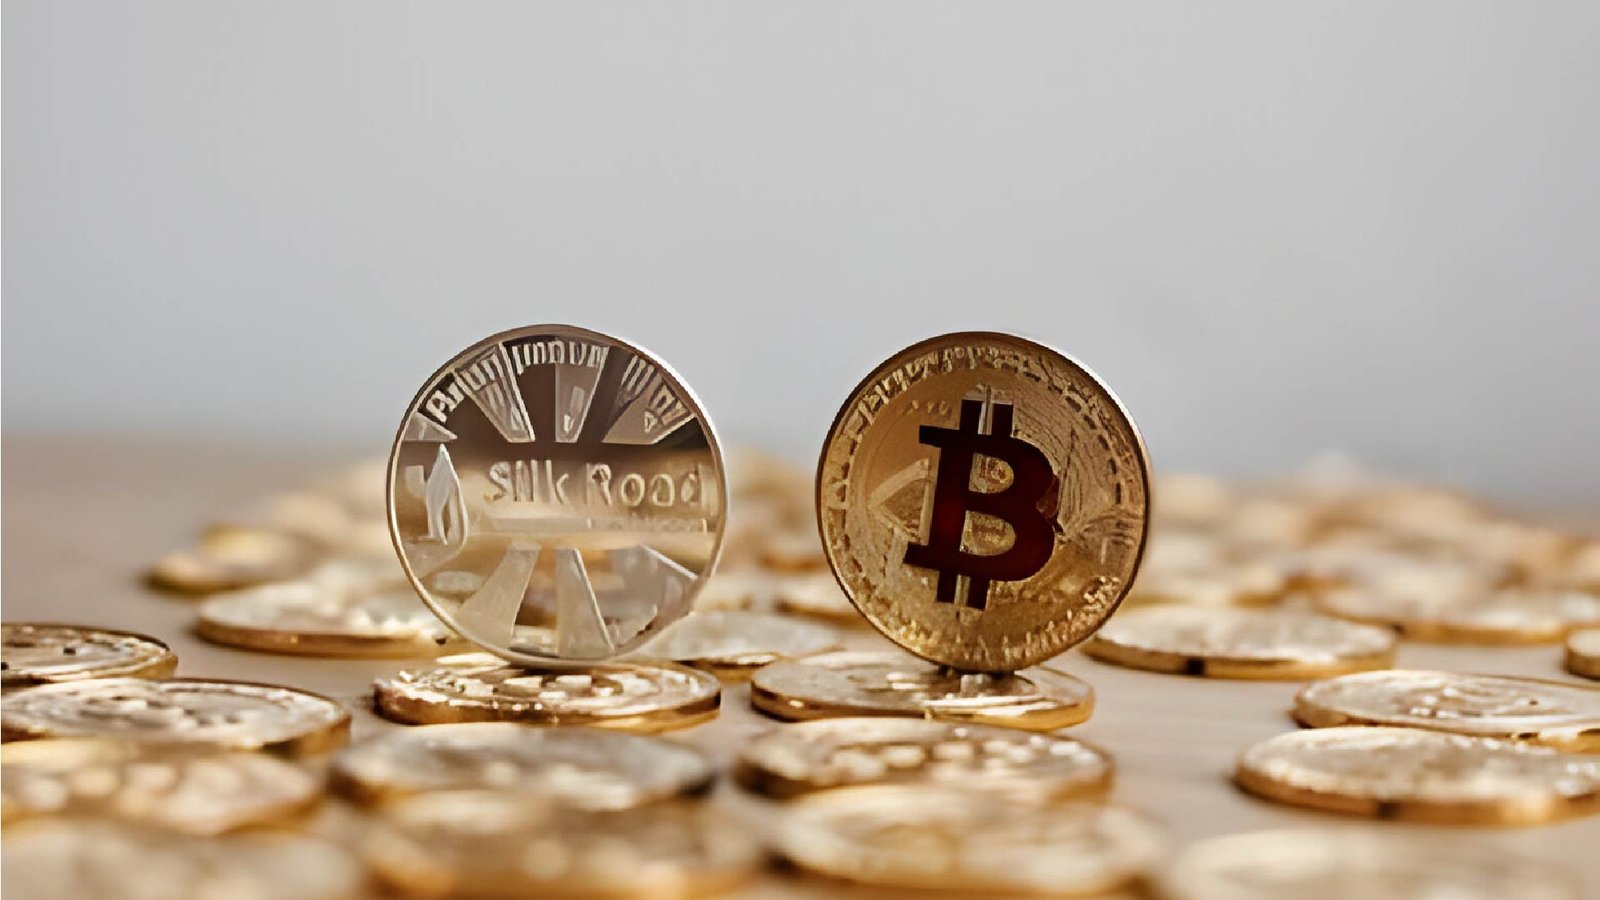 US Government Plans to Sell 30,000 Silk Road Bitcoins